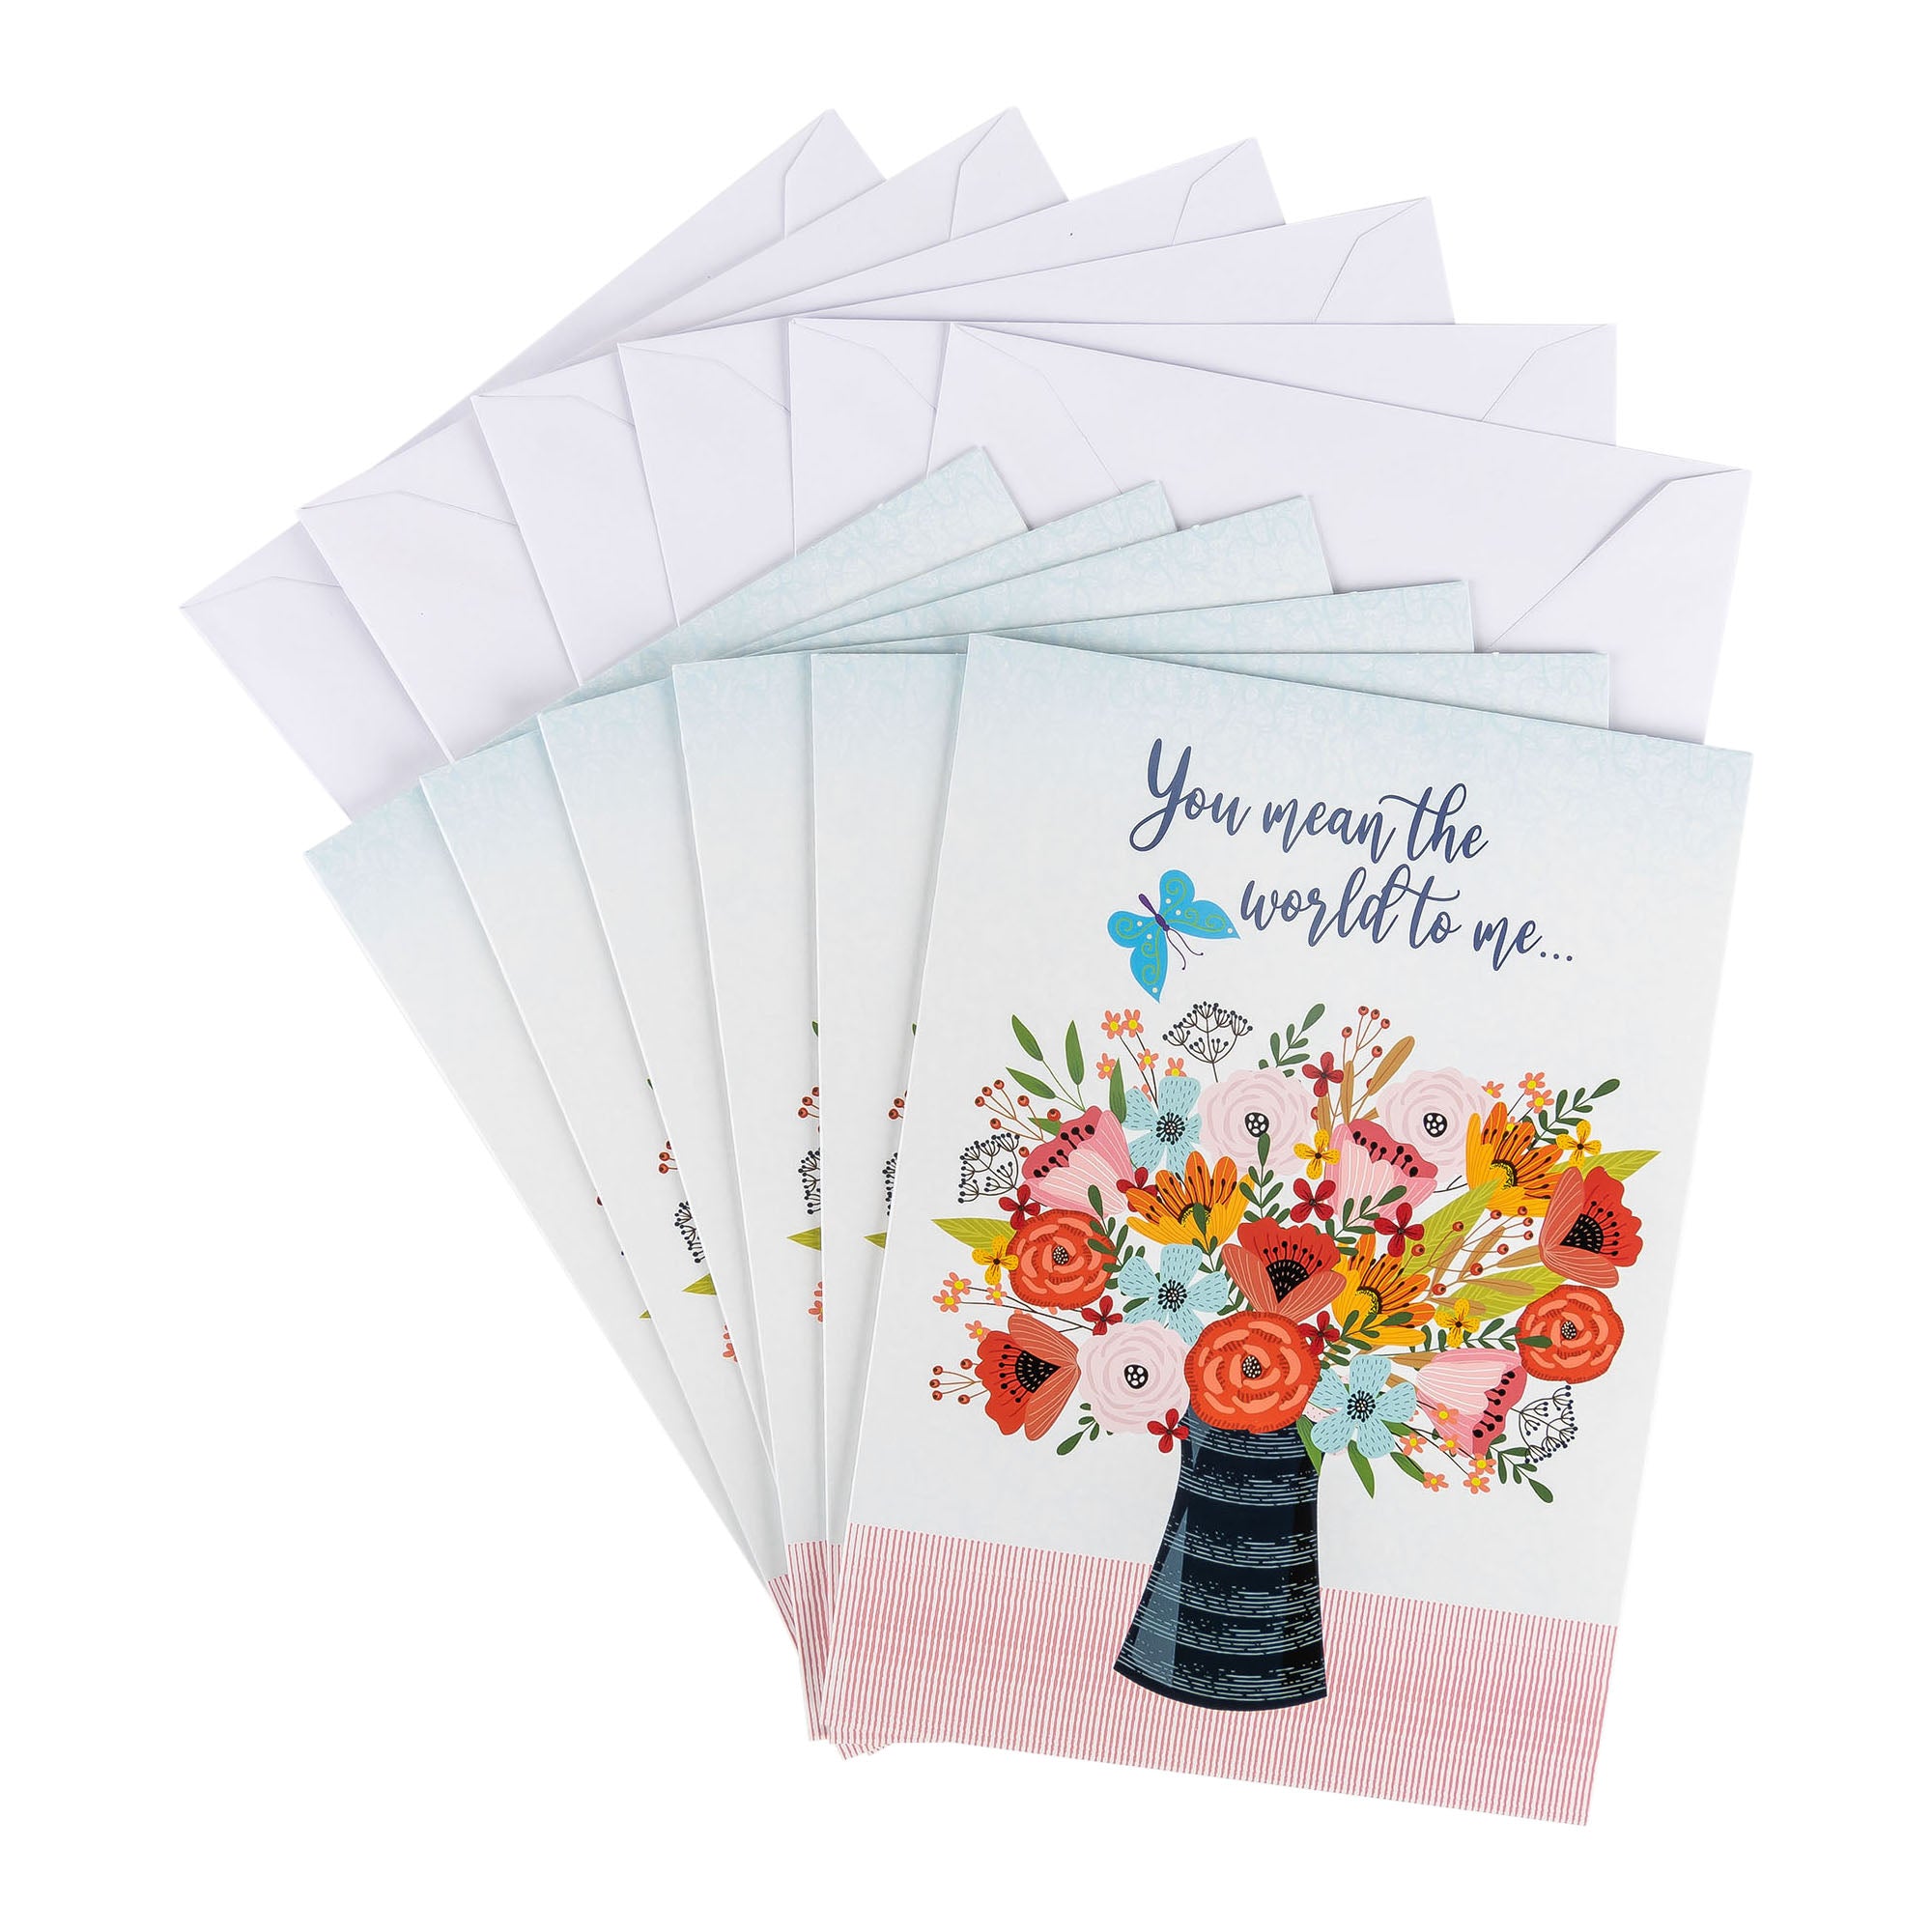 Single Cards - Friendship - World to Me Proverbs 31:10